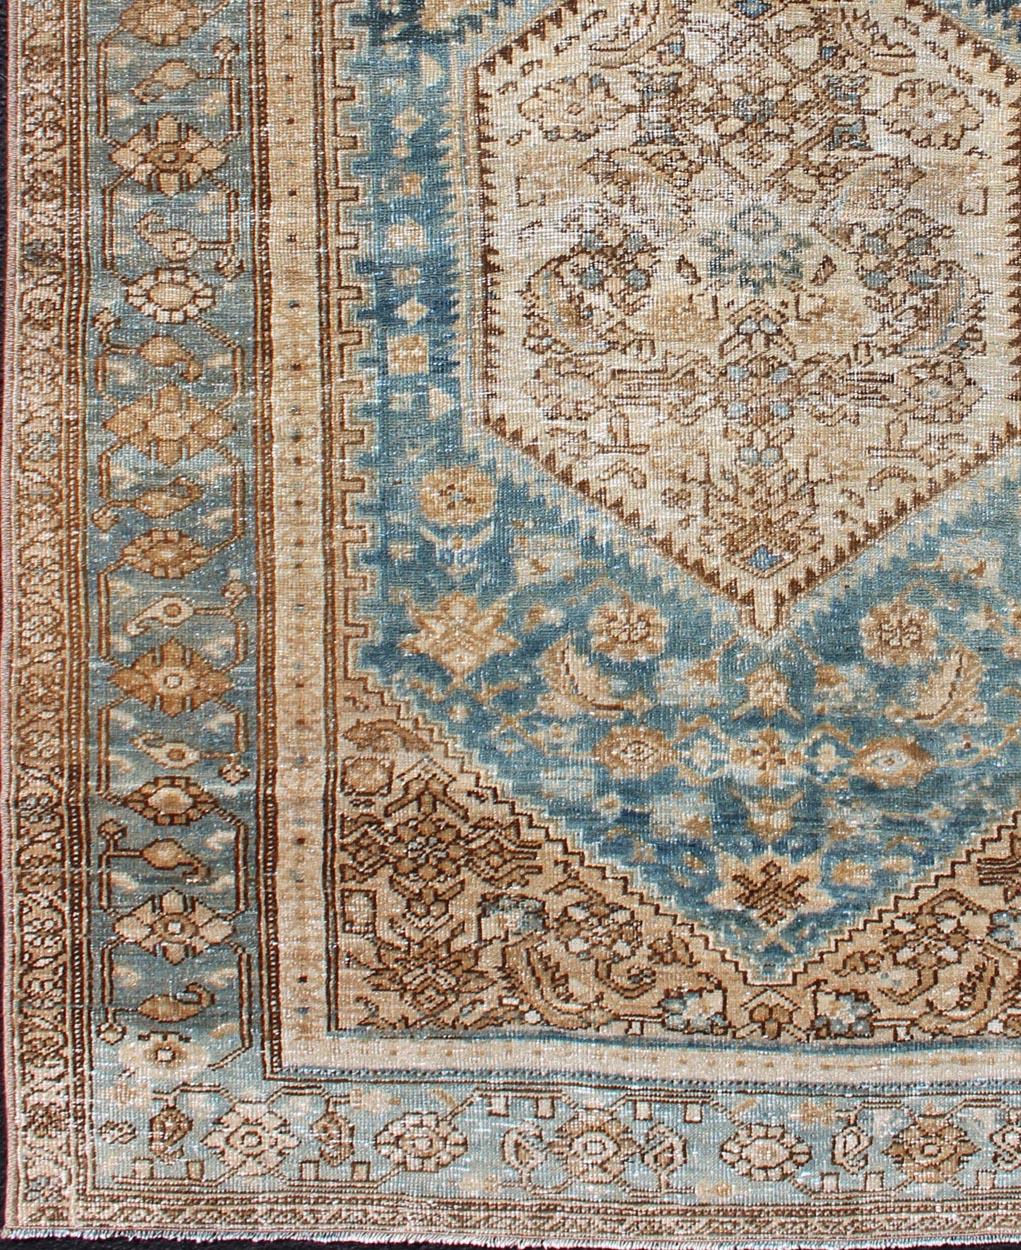 Hamedan Persian antique small rug with layered Medallions and geometric motifs in blue, brown, cream and taupe, rug sk-7569, country of origin / type: Iran / Hamedan, circa 1910.

This magnificent antique Hamedan features beautiful coloration,